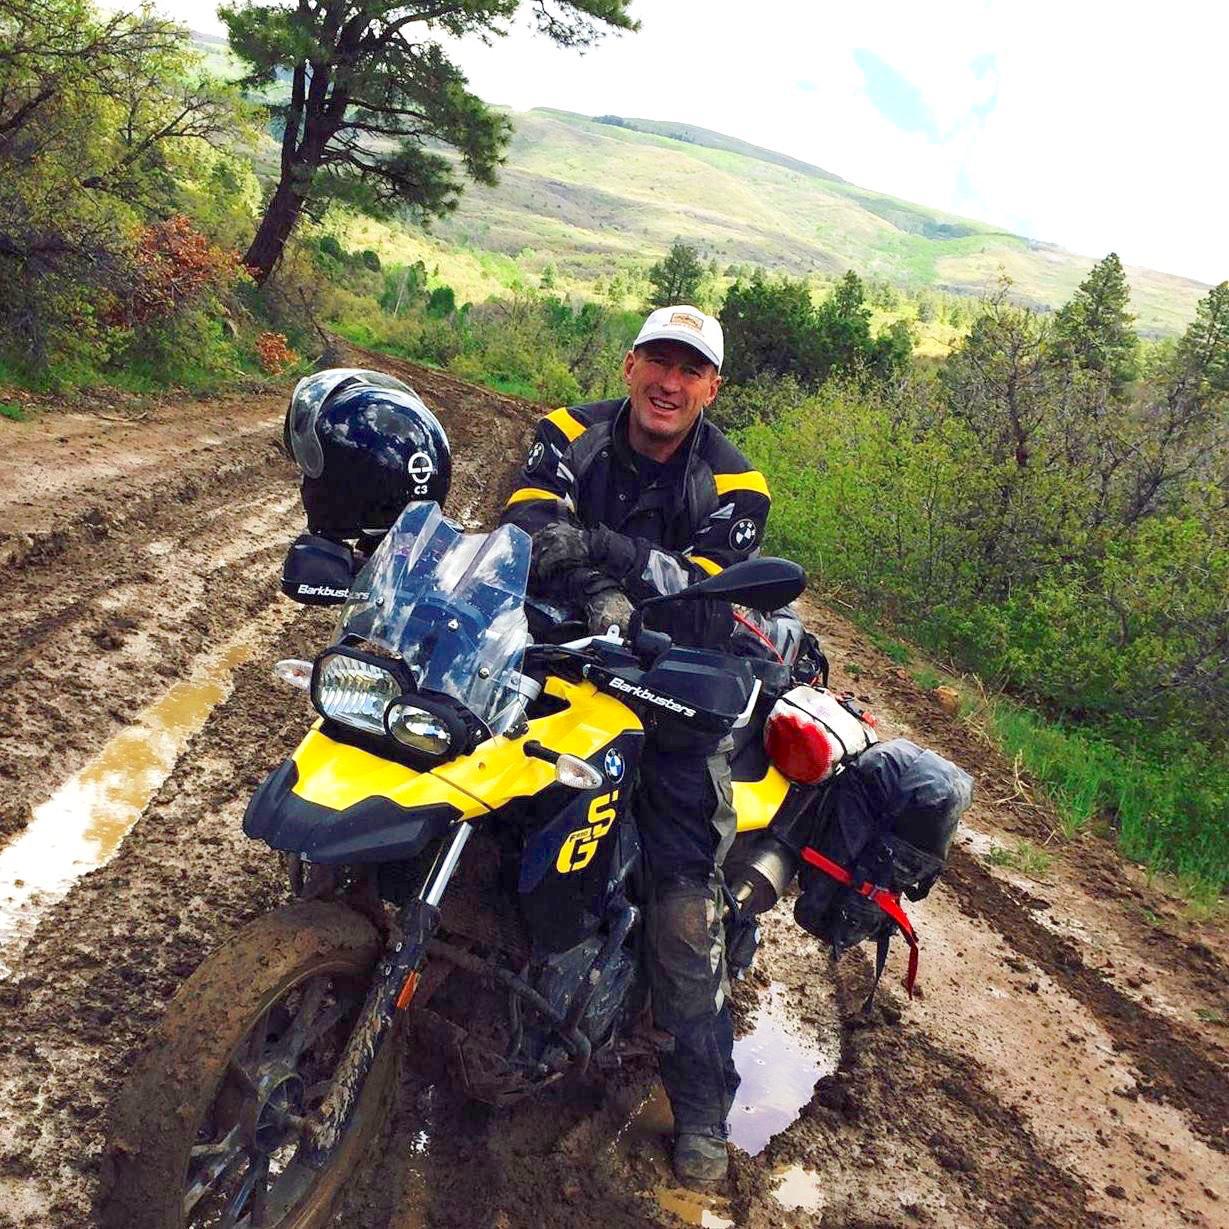 John Hax | Founder & Lead Guide 106 West Motorcycle Adventure Tours